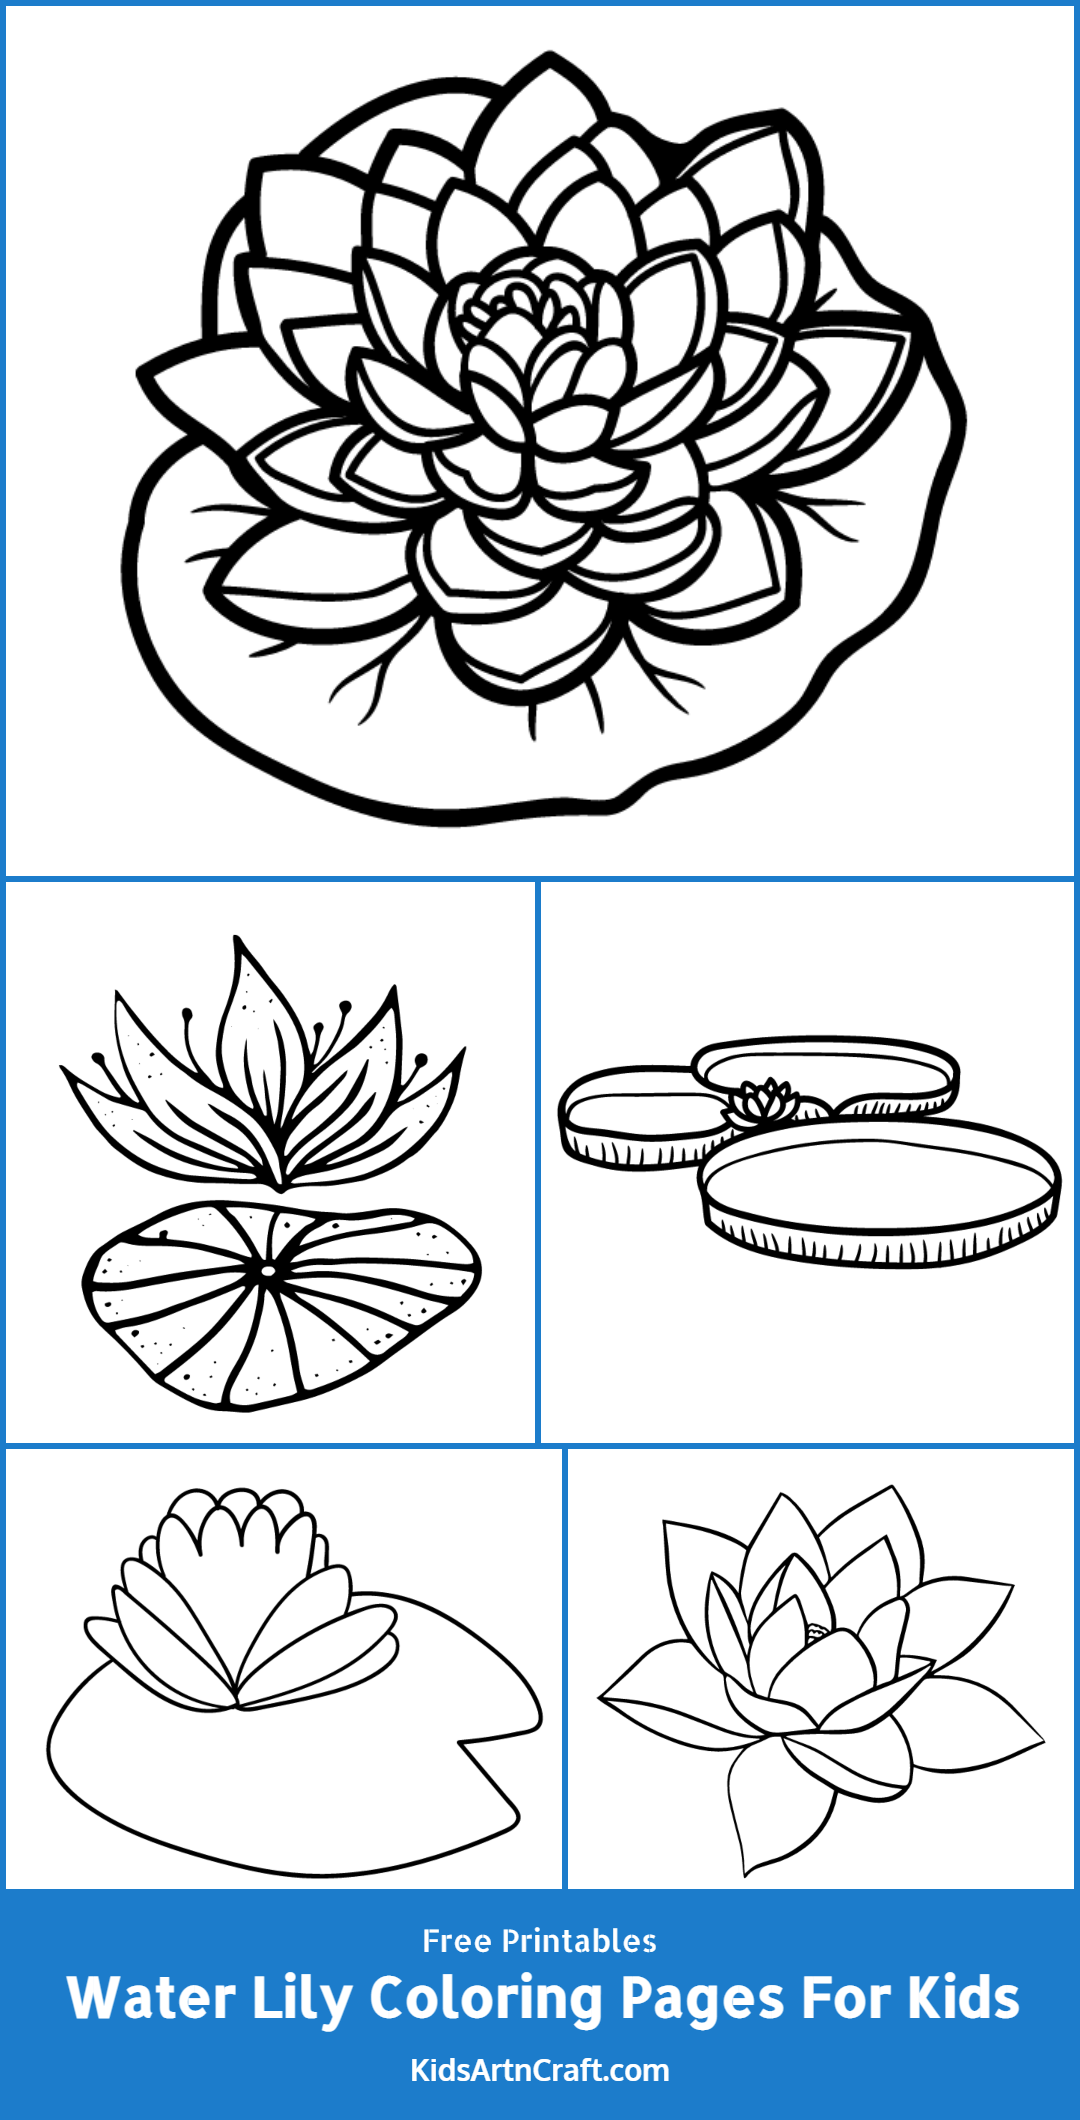 Water Lily Coloring Pages For Kids – Free Printables